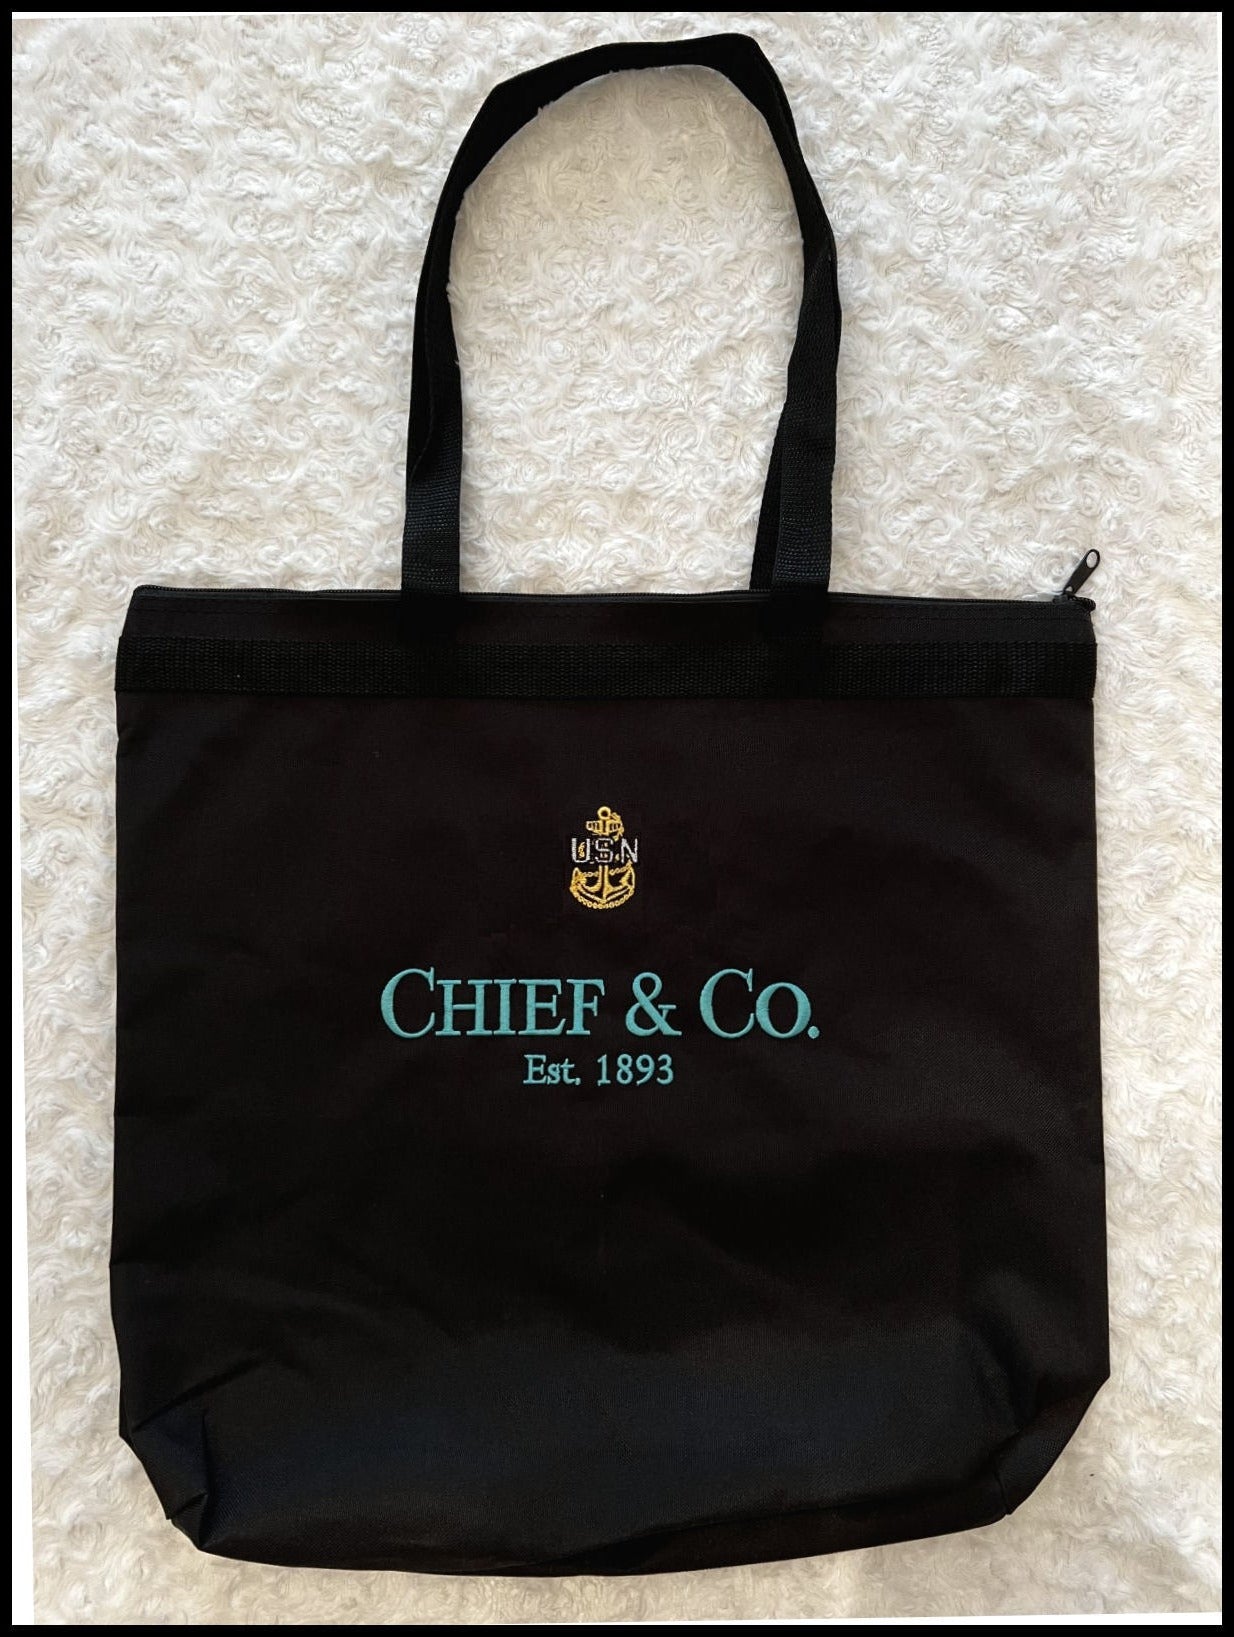 Chief & Co. Embroidered Zippered Tote Black & Tahiti Blue with Gold Anchor